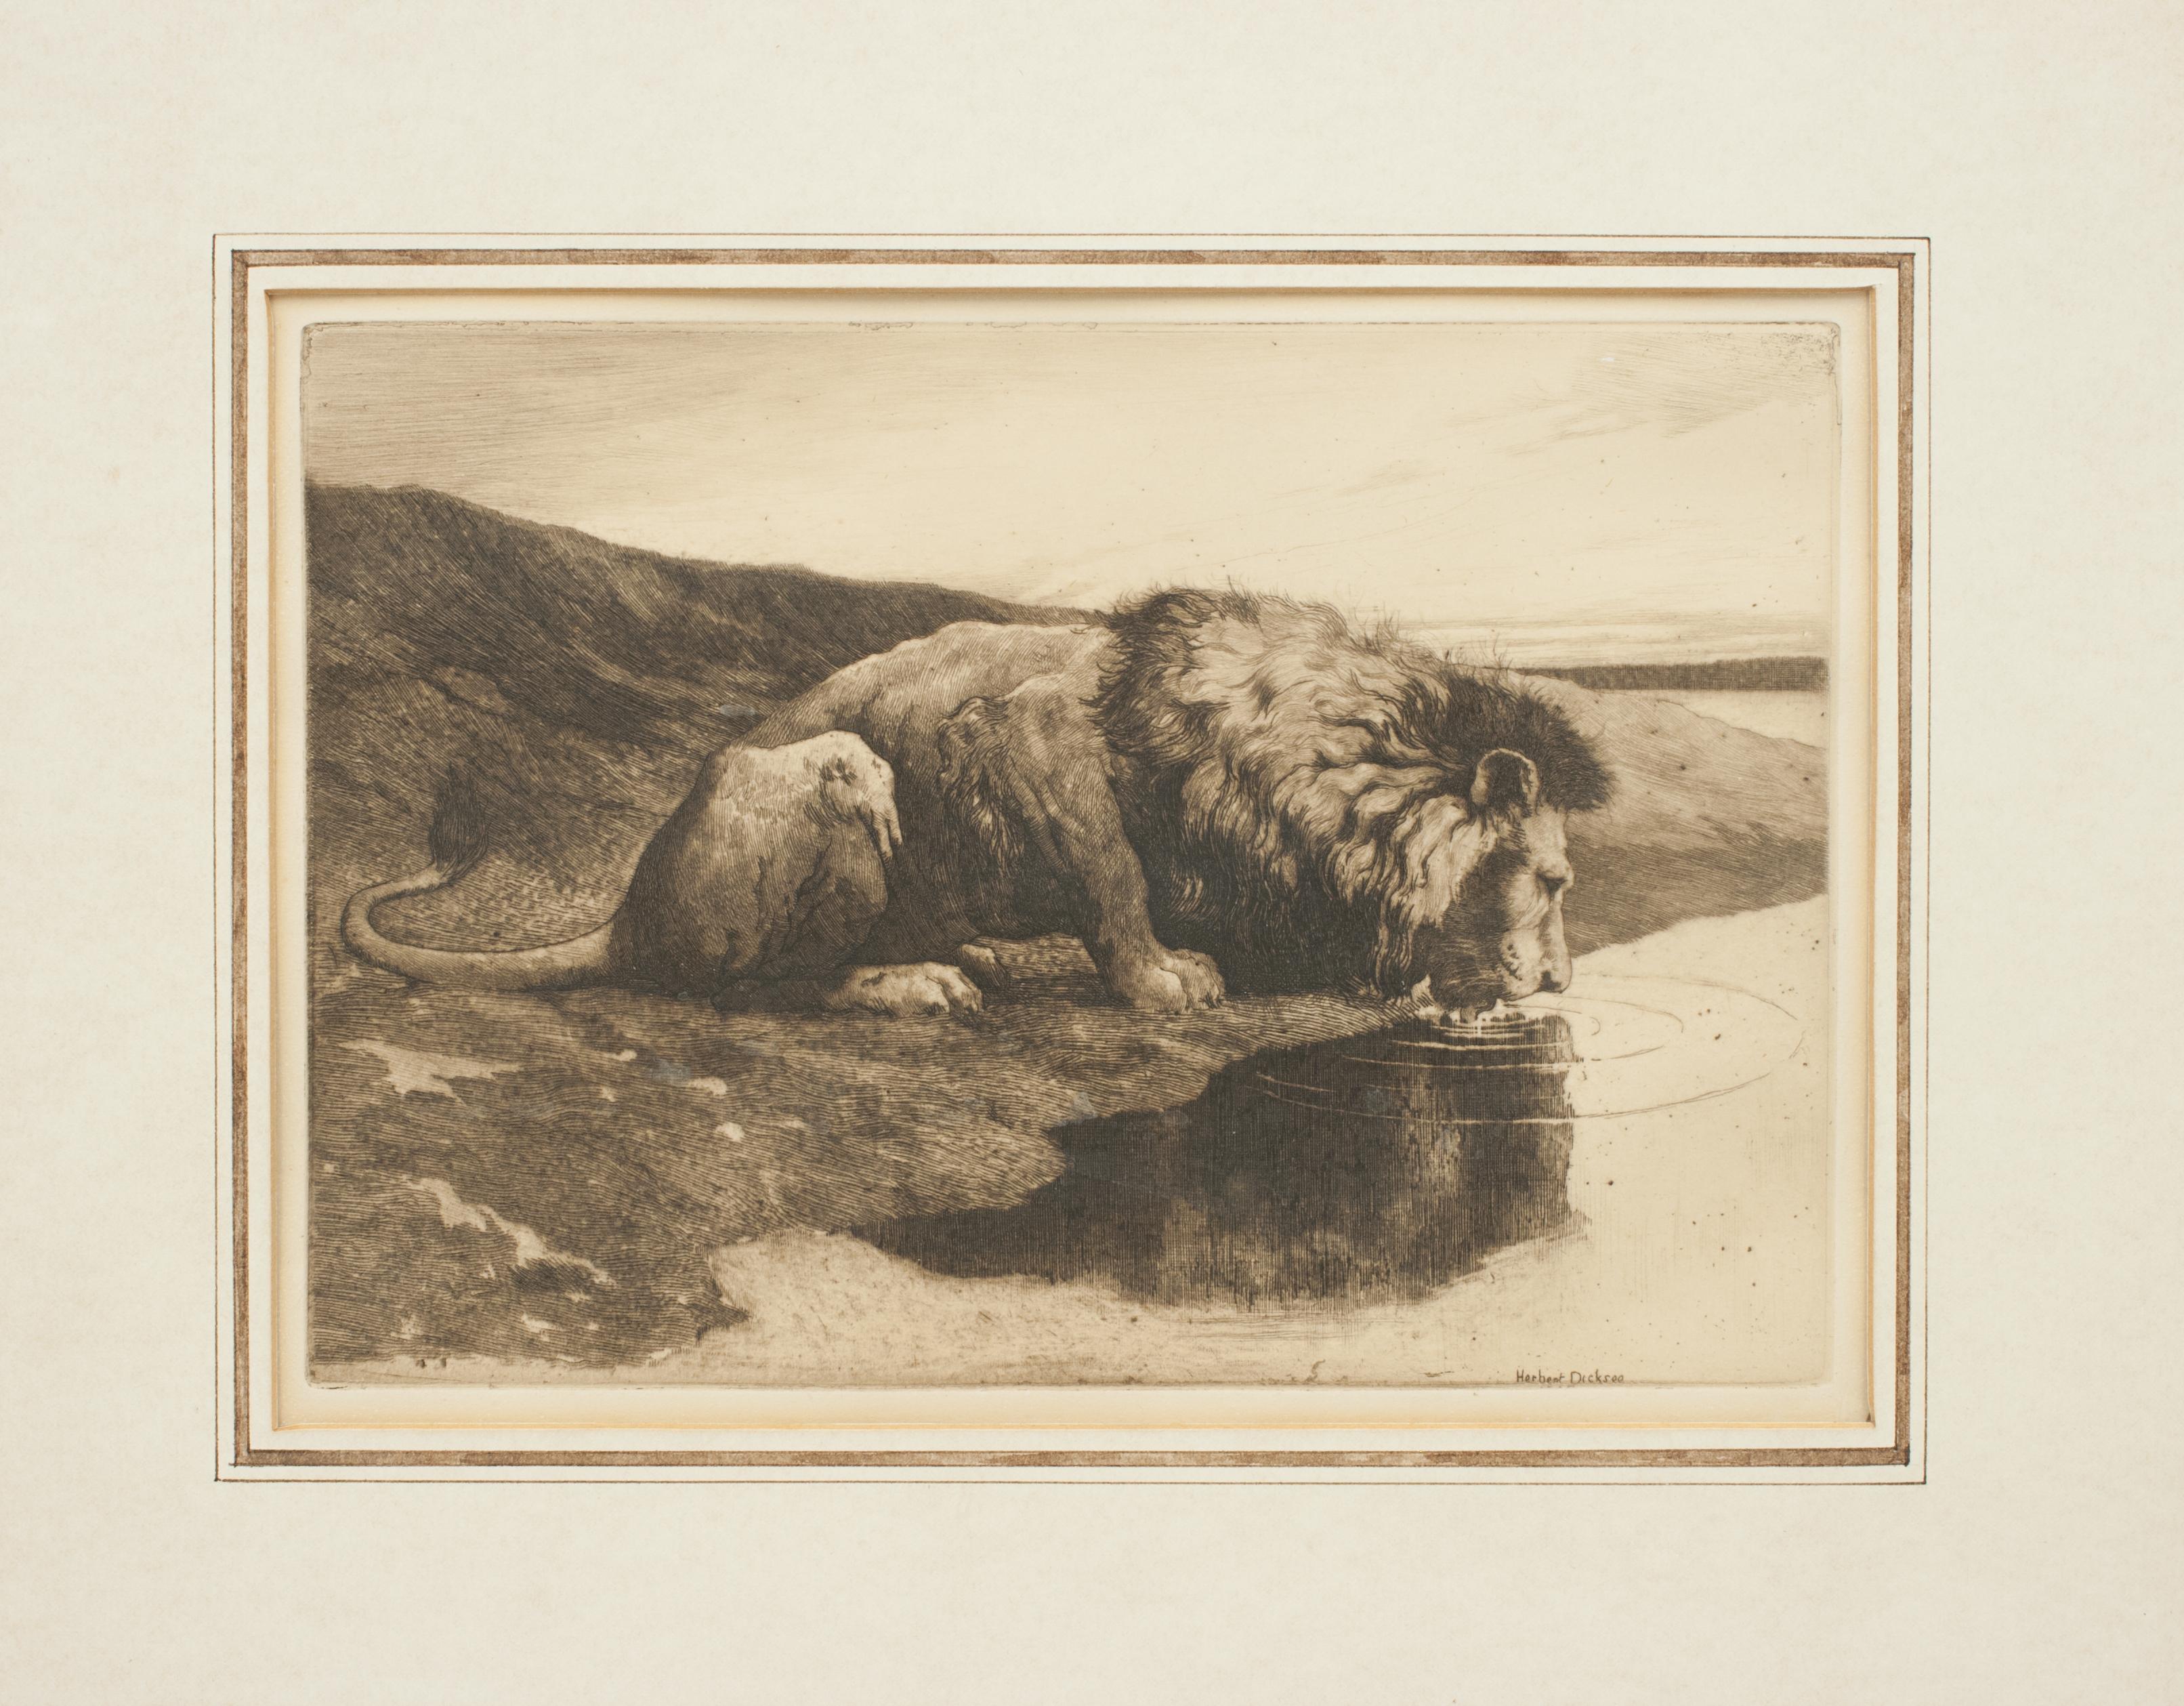 Sporting Art Antique Etching by Herbert Dicksee 'A Drinking Lion'